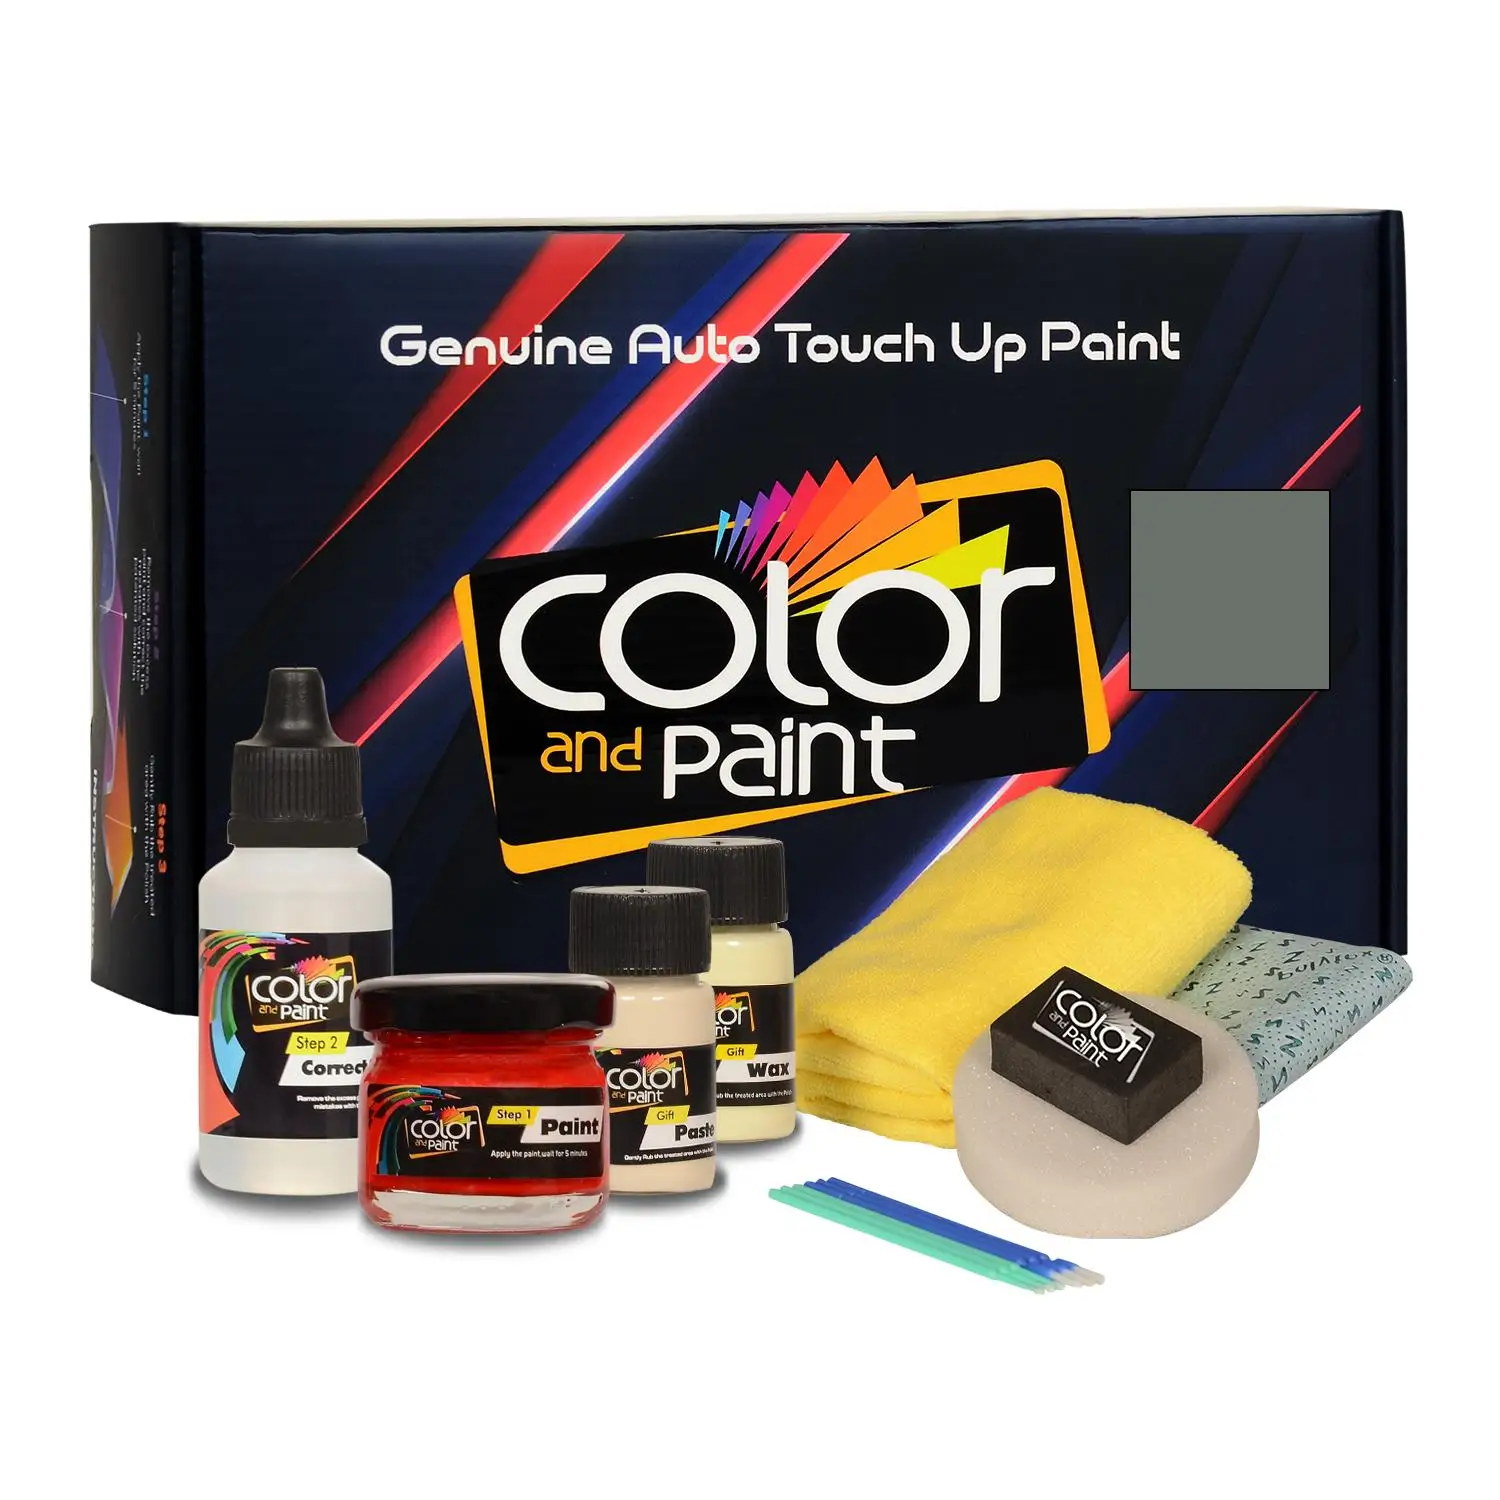 

Color and Paint compatible with Renault Automotive Touch Up Paint - VERT GIVERNY CAMAIEU NACRE MAT - 225.74 - Basic care